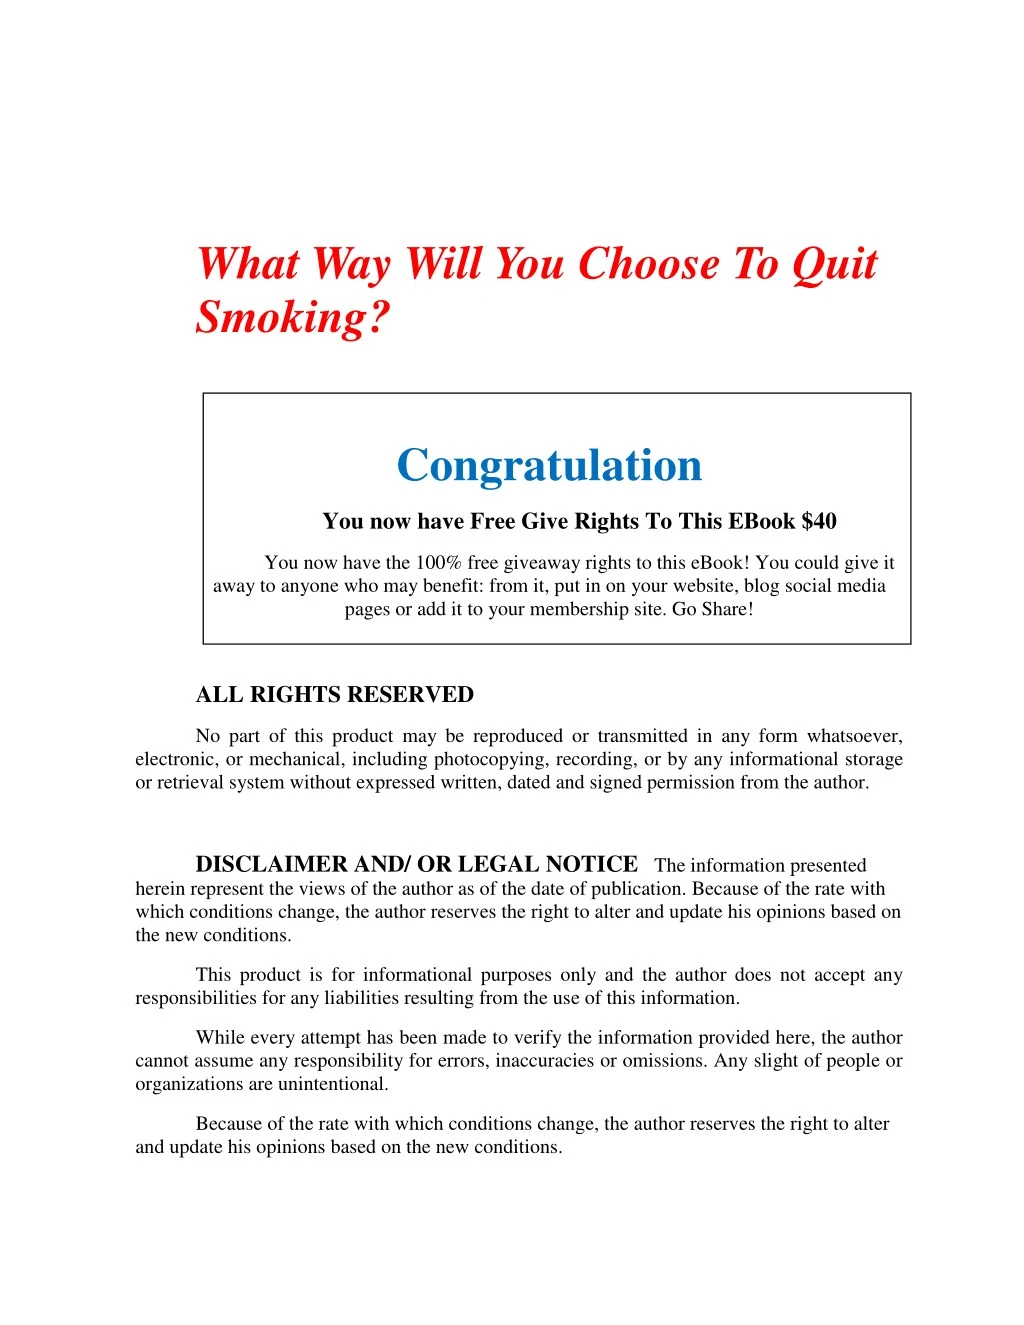 what way will you choose to quit smoking